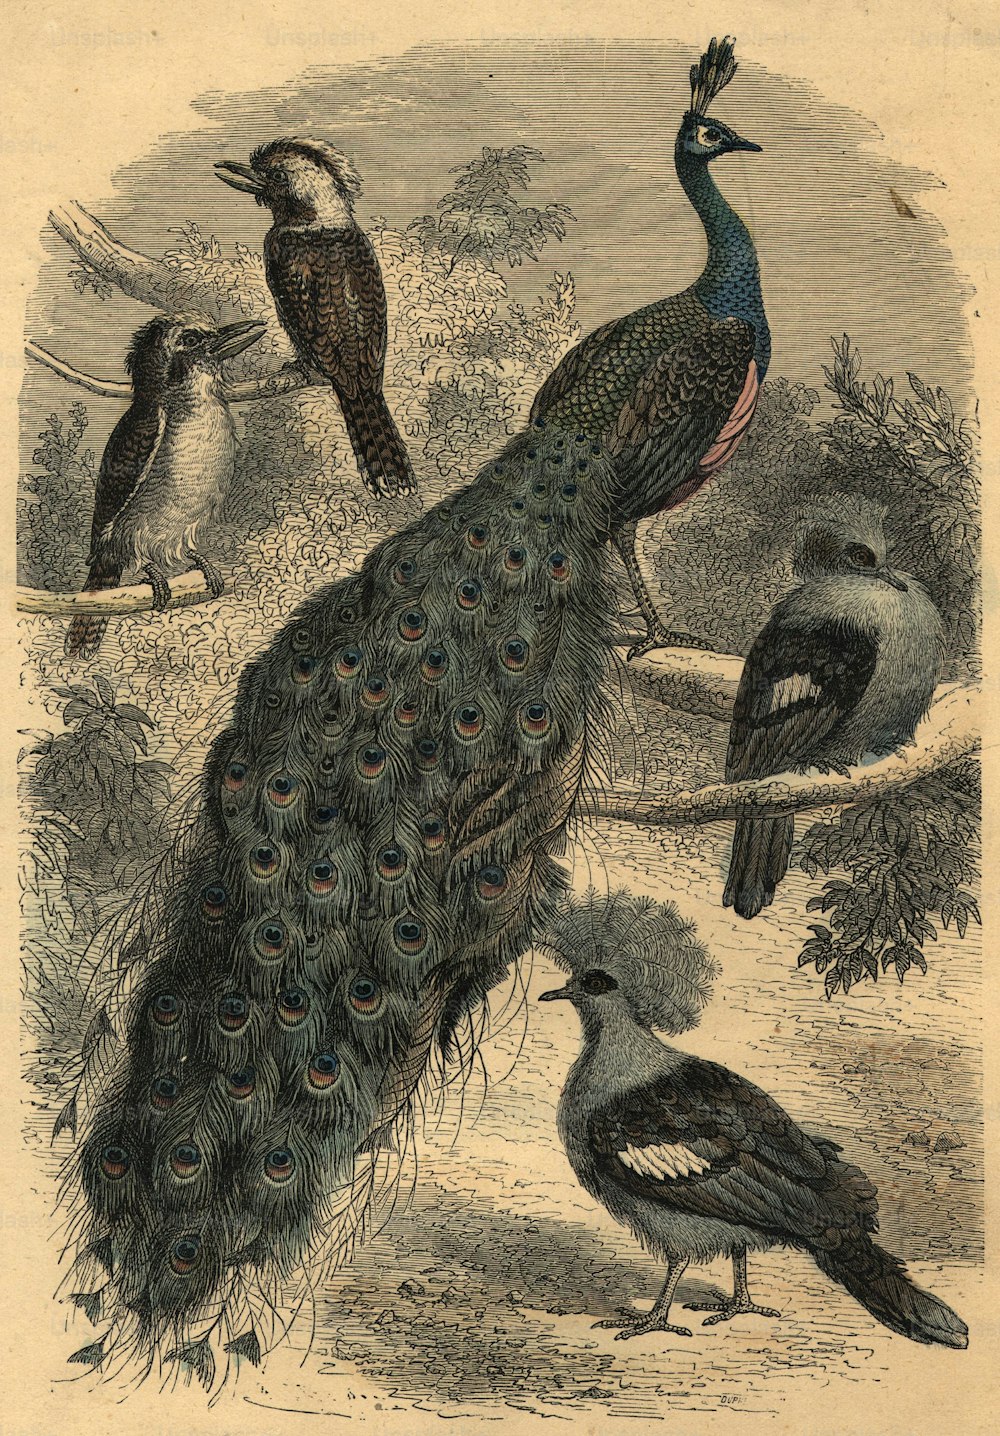 circa 1800:  A peacock with other birds.  (Photo by Hulton Archive/Getty Images)